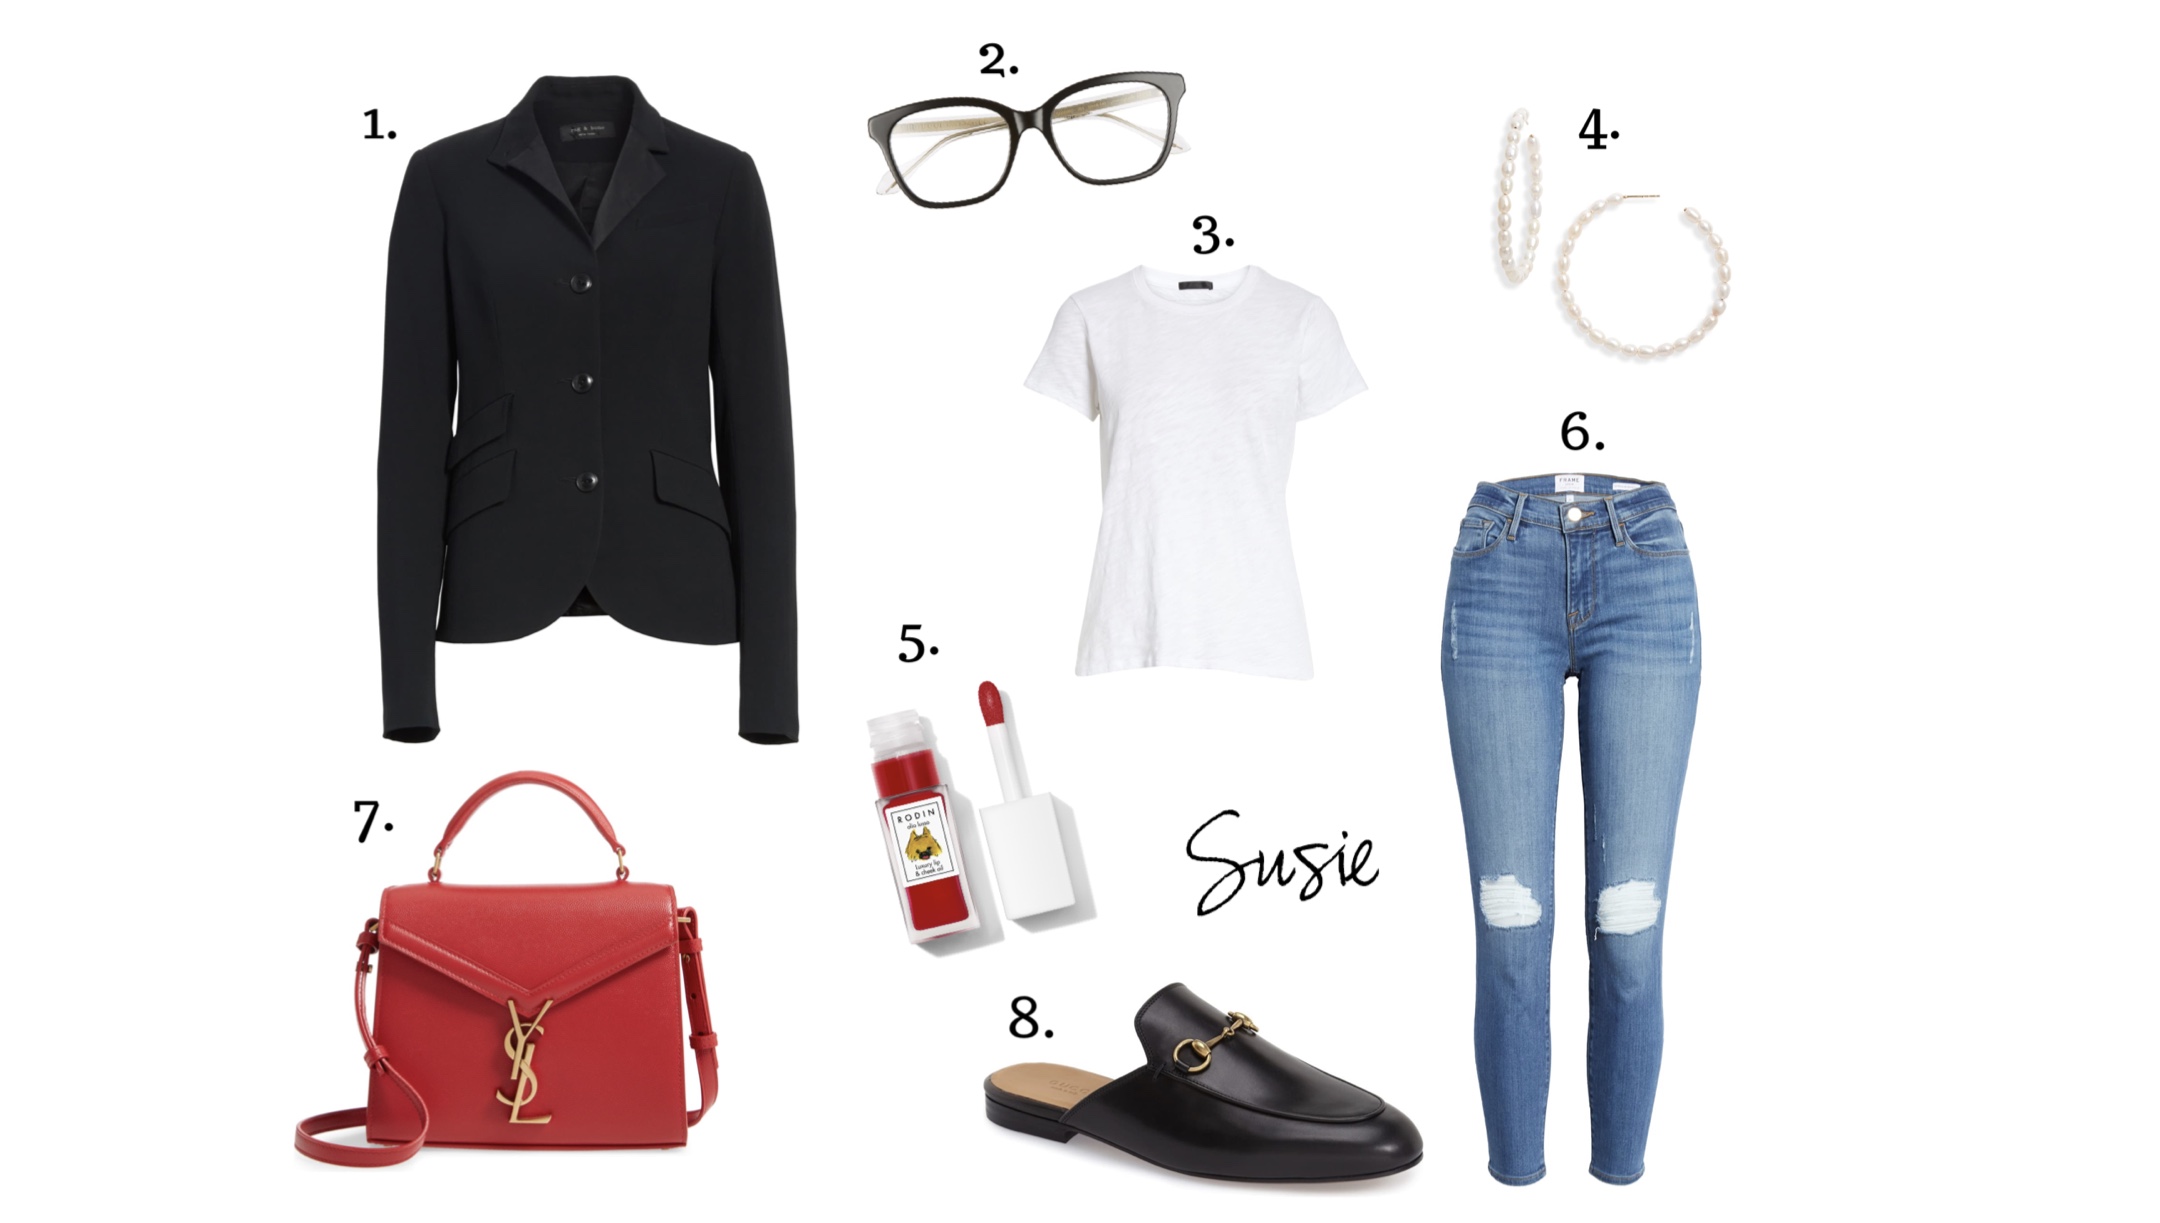 Susie’s style board